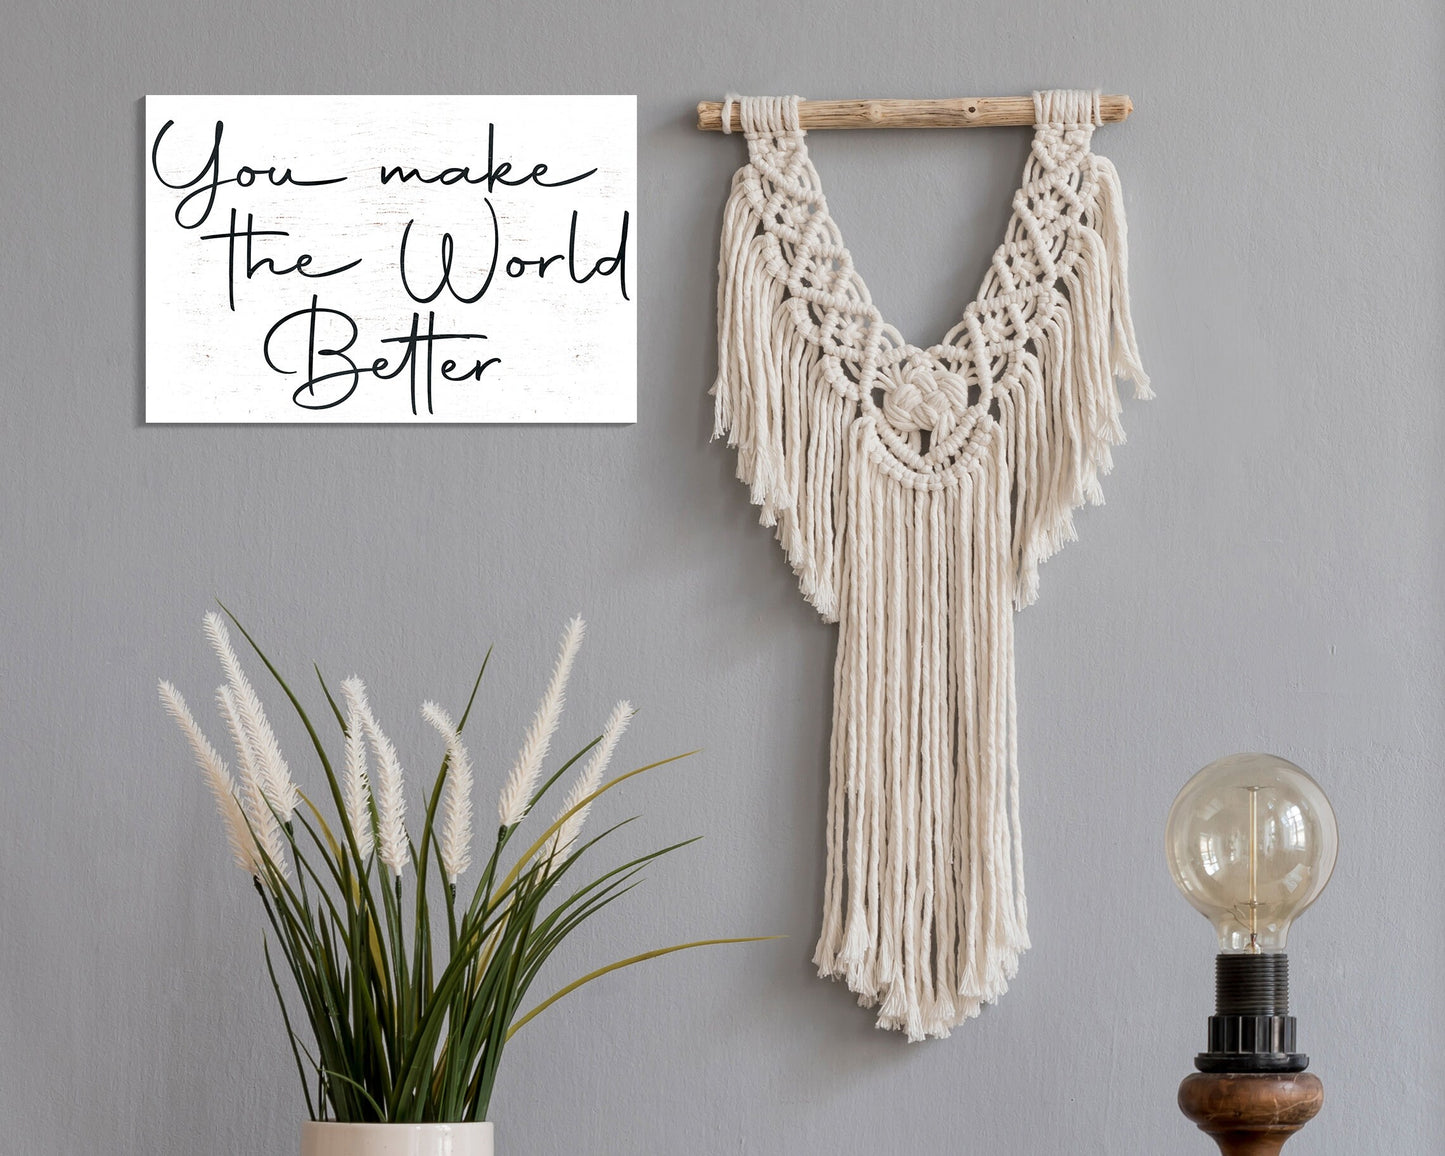 You Make the World Better - 7.5x5in Wooden Wall Decor - Inspirational Sign for Home and Office, Great Gift Idea for Friends & Loved Ones